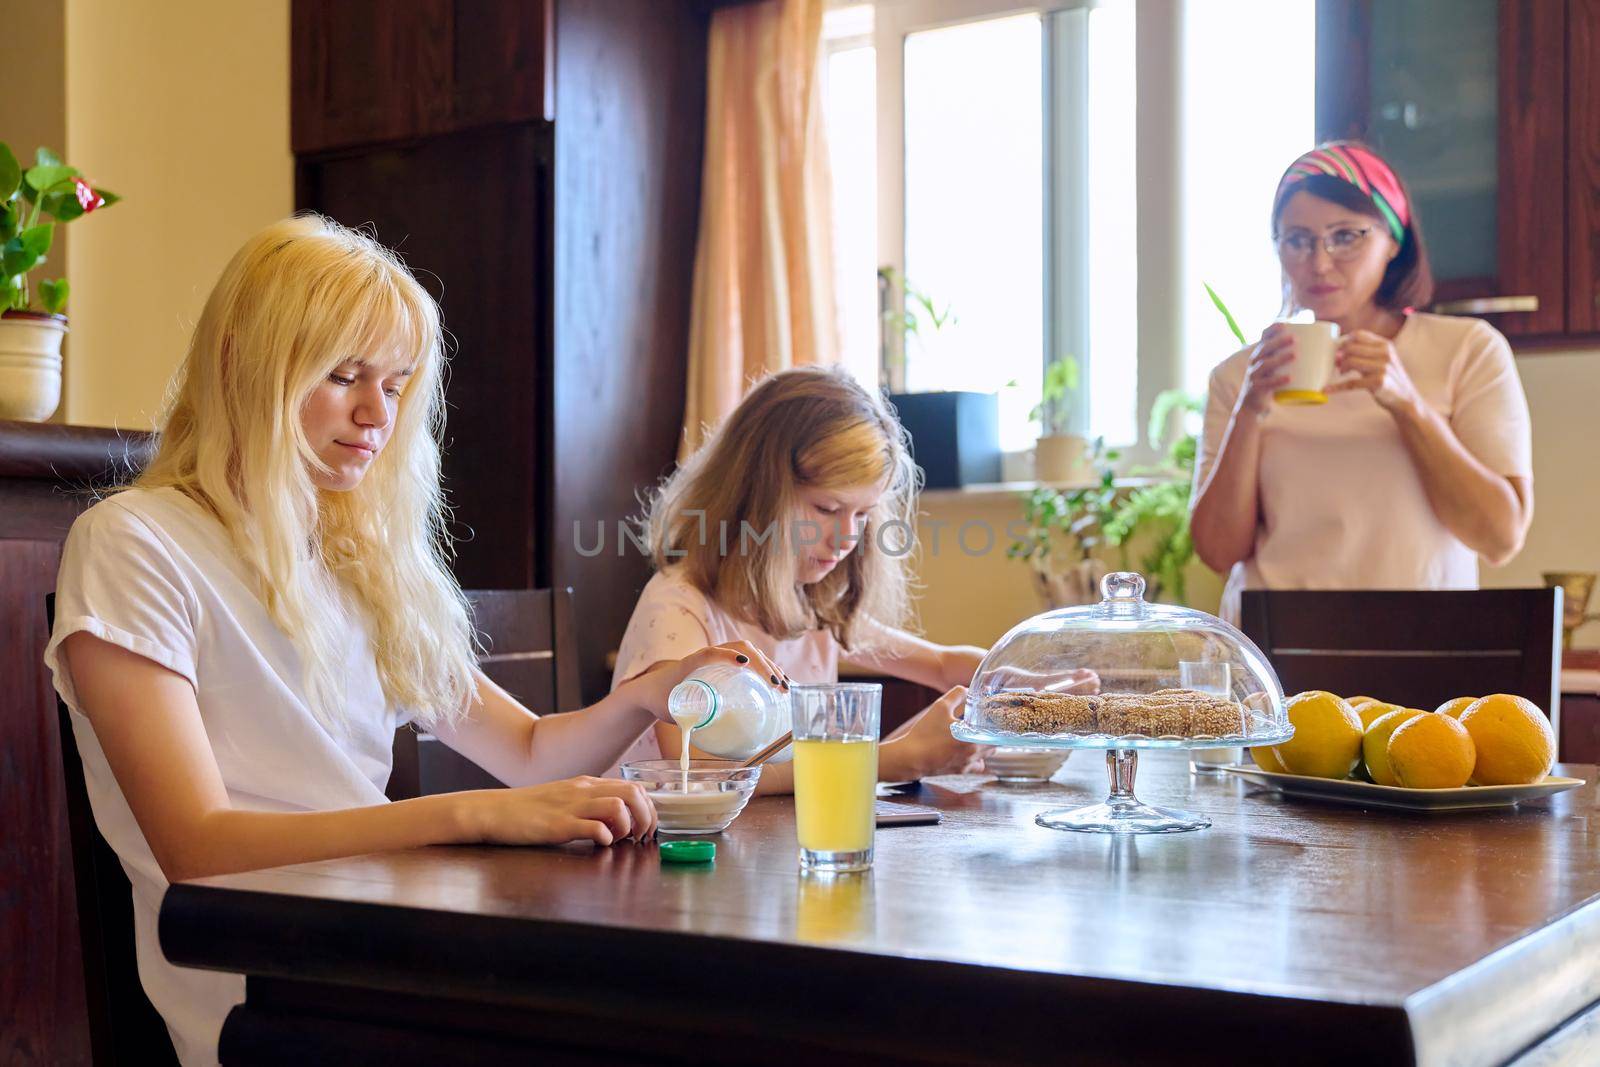 Family, girls children eating at table in kitchen. Home kitchen interior, mother with a cup, sisters eating and looking at smartphone screen. Lifestyle, daily routine, home, people, technology